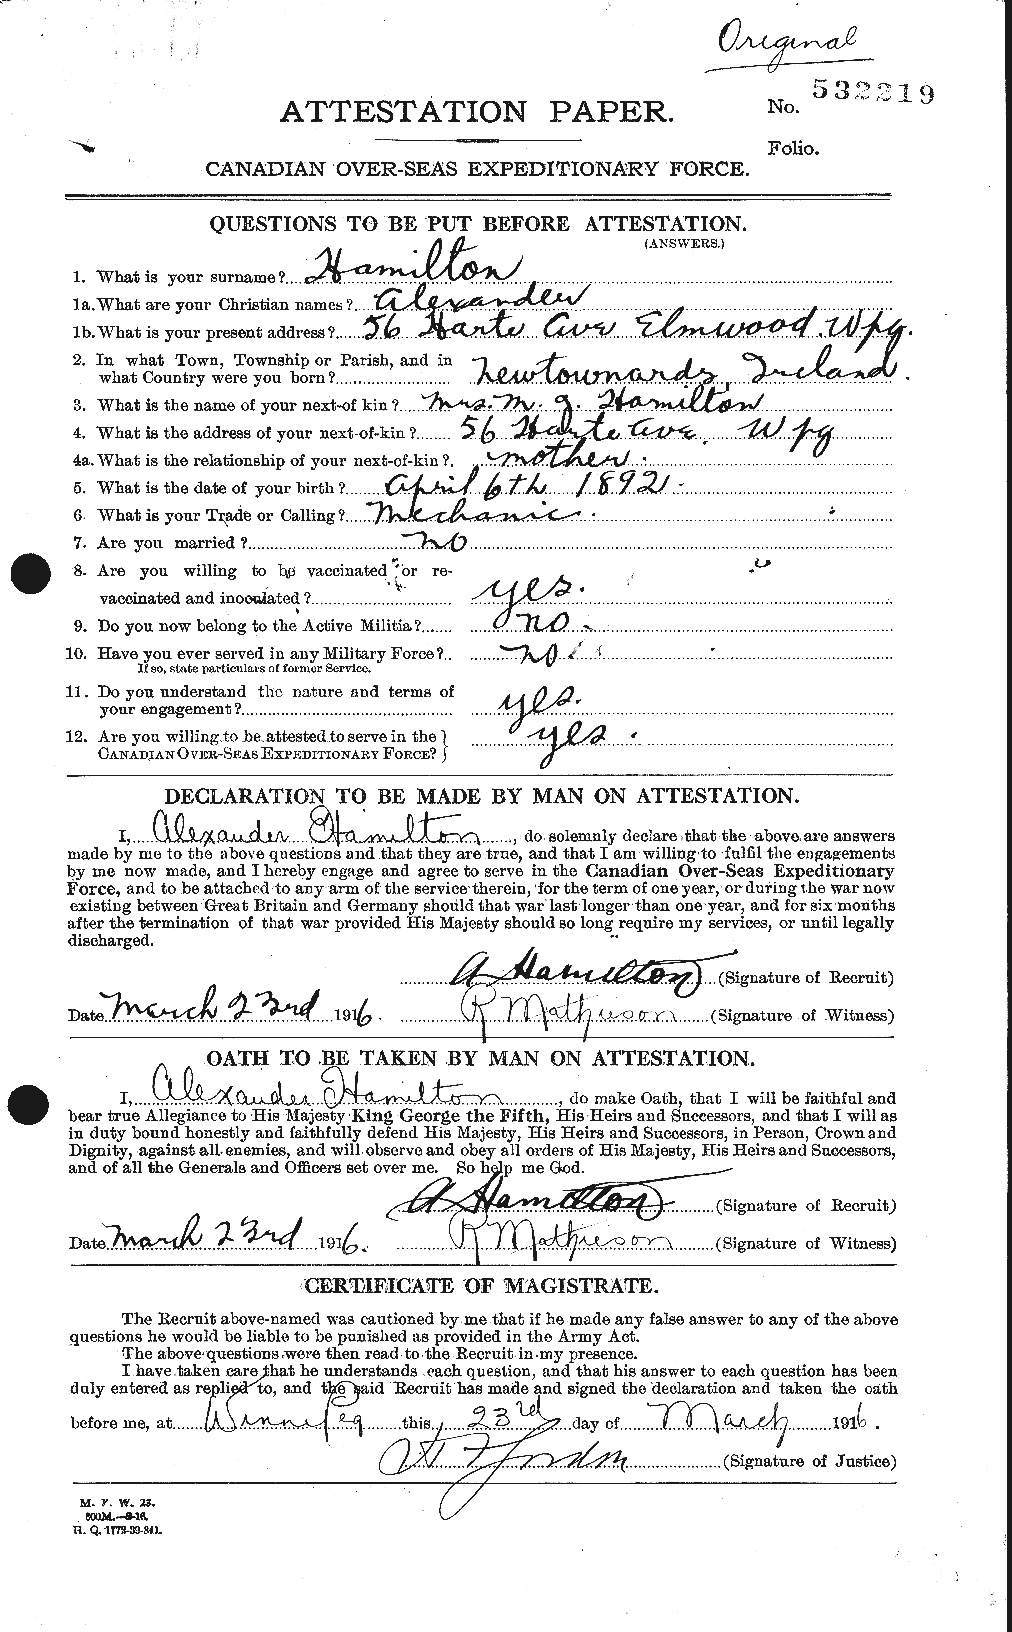 Personnel Records of the First World War - CEF 375188a